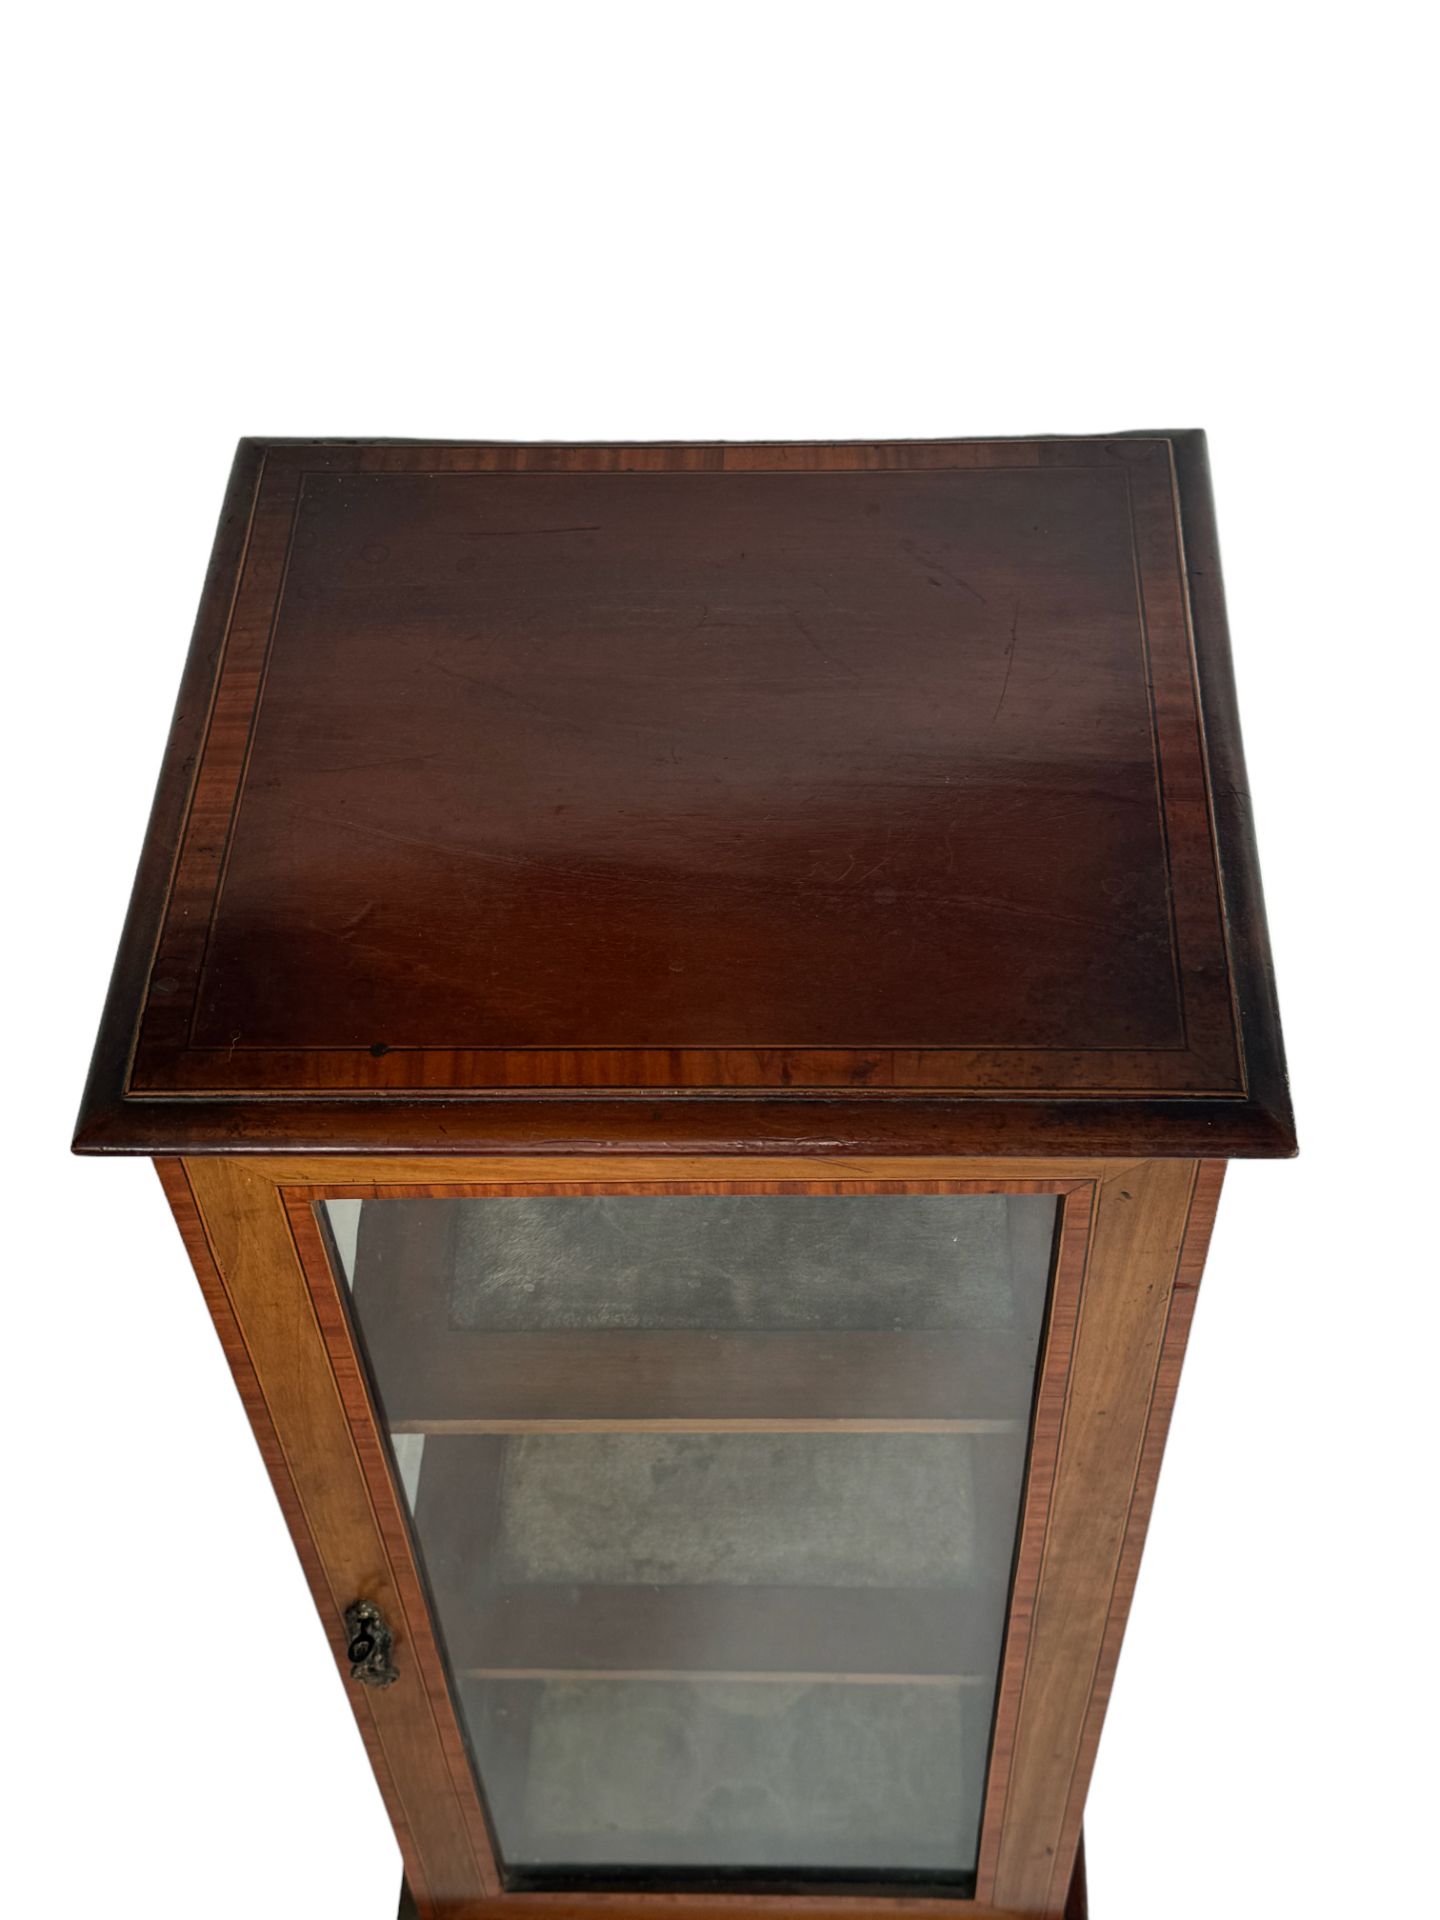 A small Edwardian mahogany and satinwood banded freestanding display cabinet / vitrine - Image 4 of 4